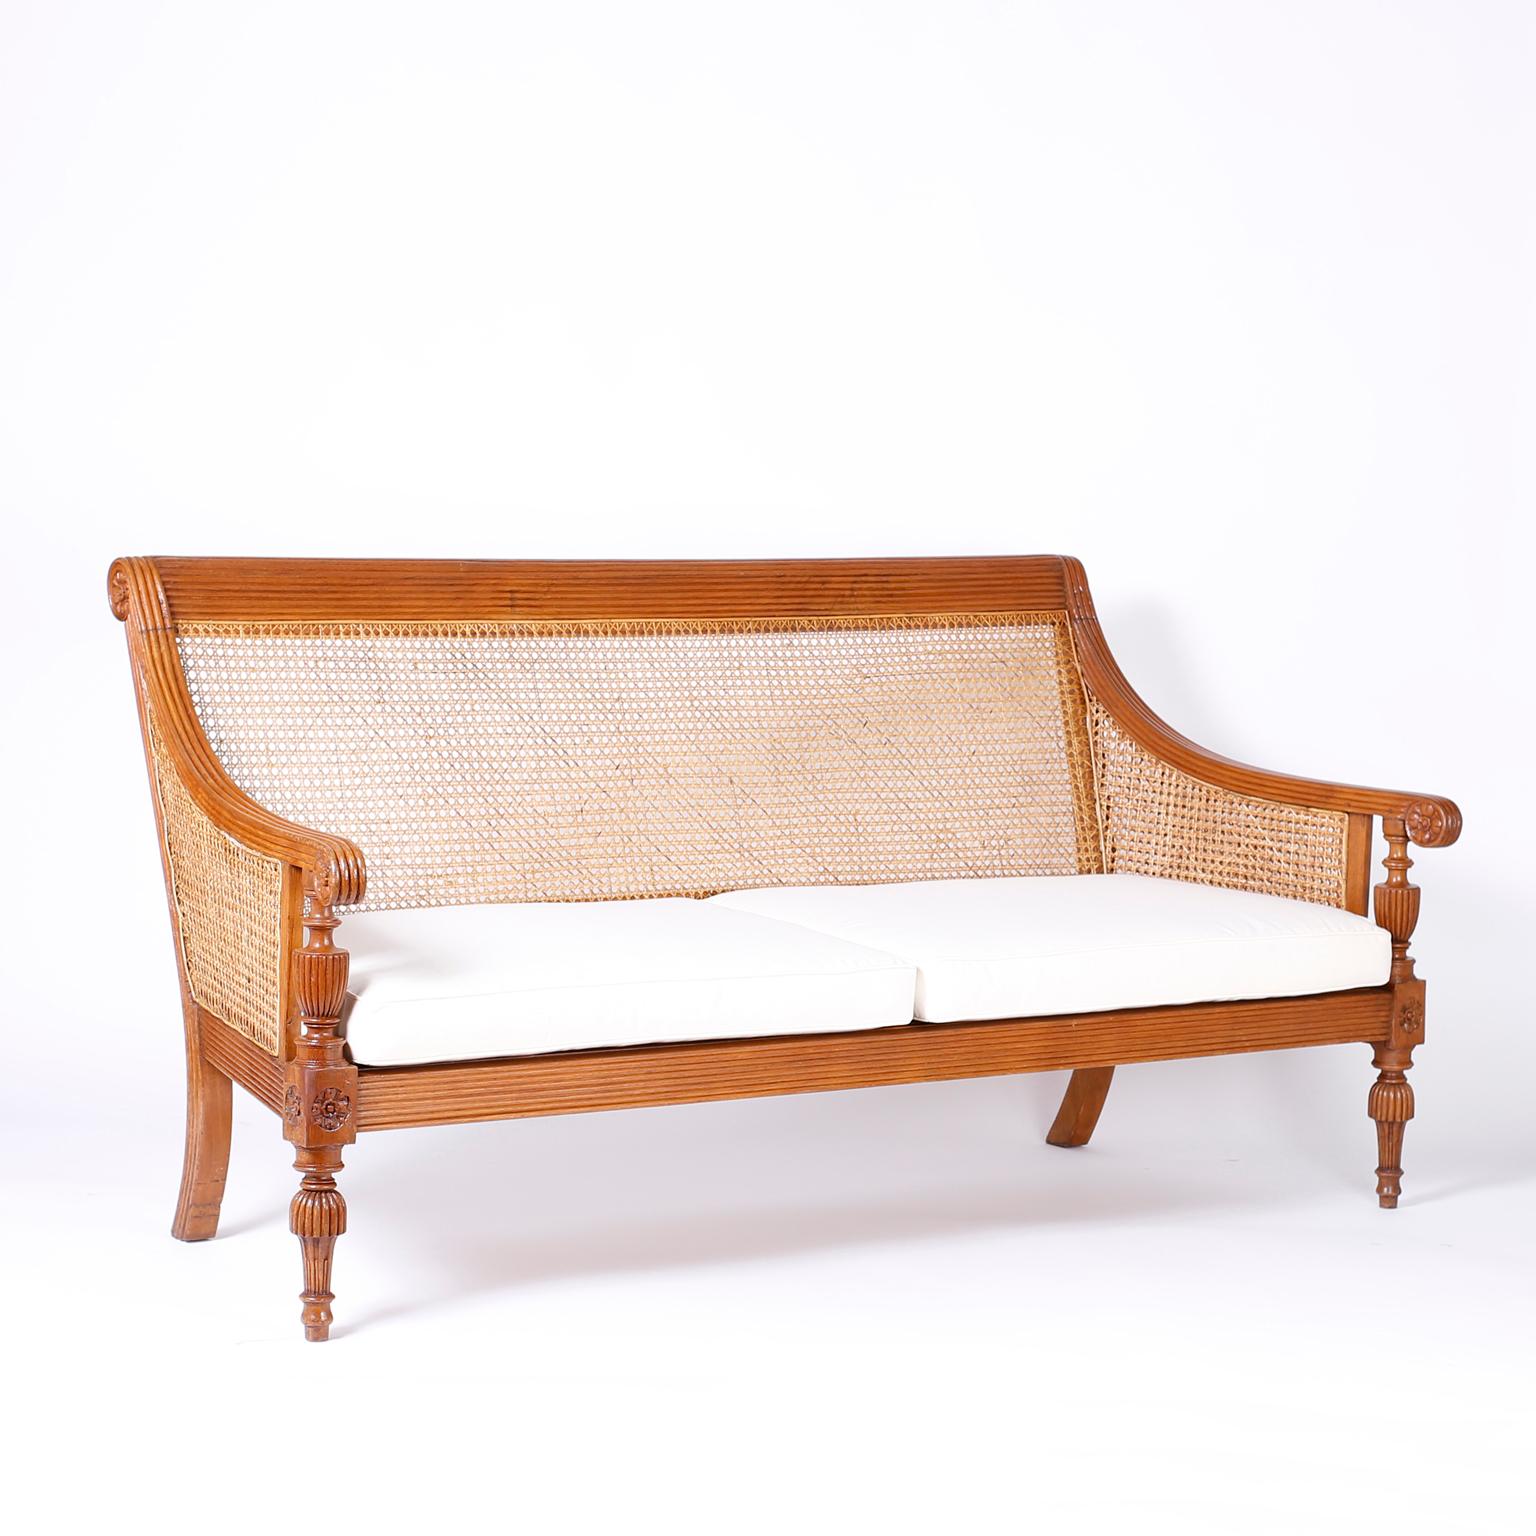 Antique Anglo-Indian sofa crafted in teak wood with pegged construction carved and beaded frame, caned back and seat and Classic carved, turned legs.